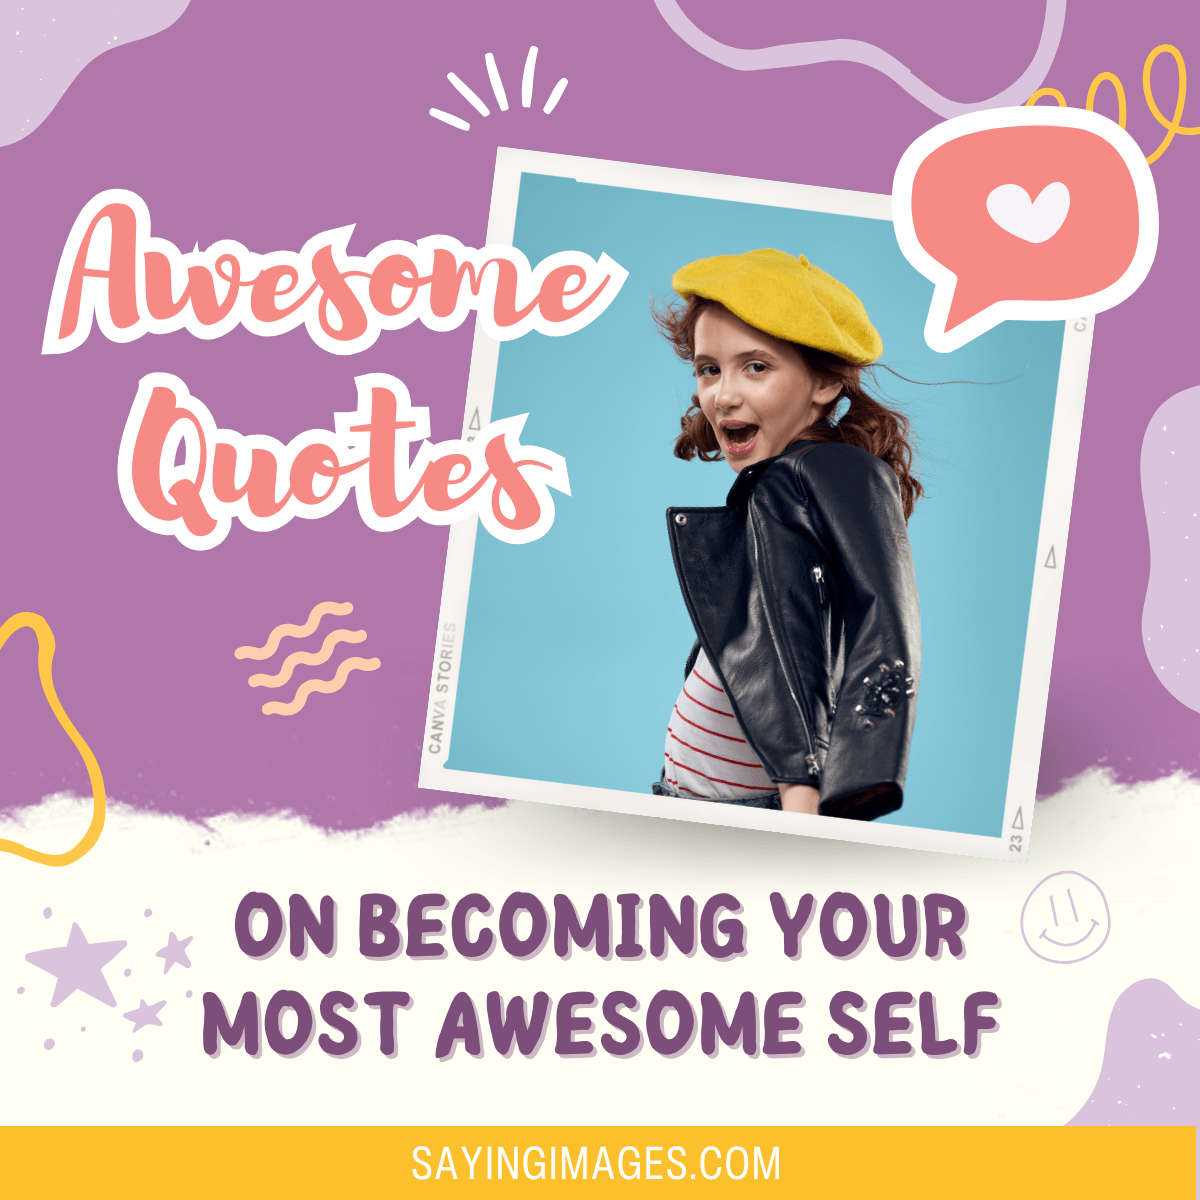 Quotes on Becoming Your Most Awesome Self